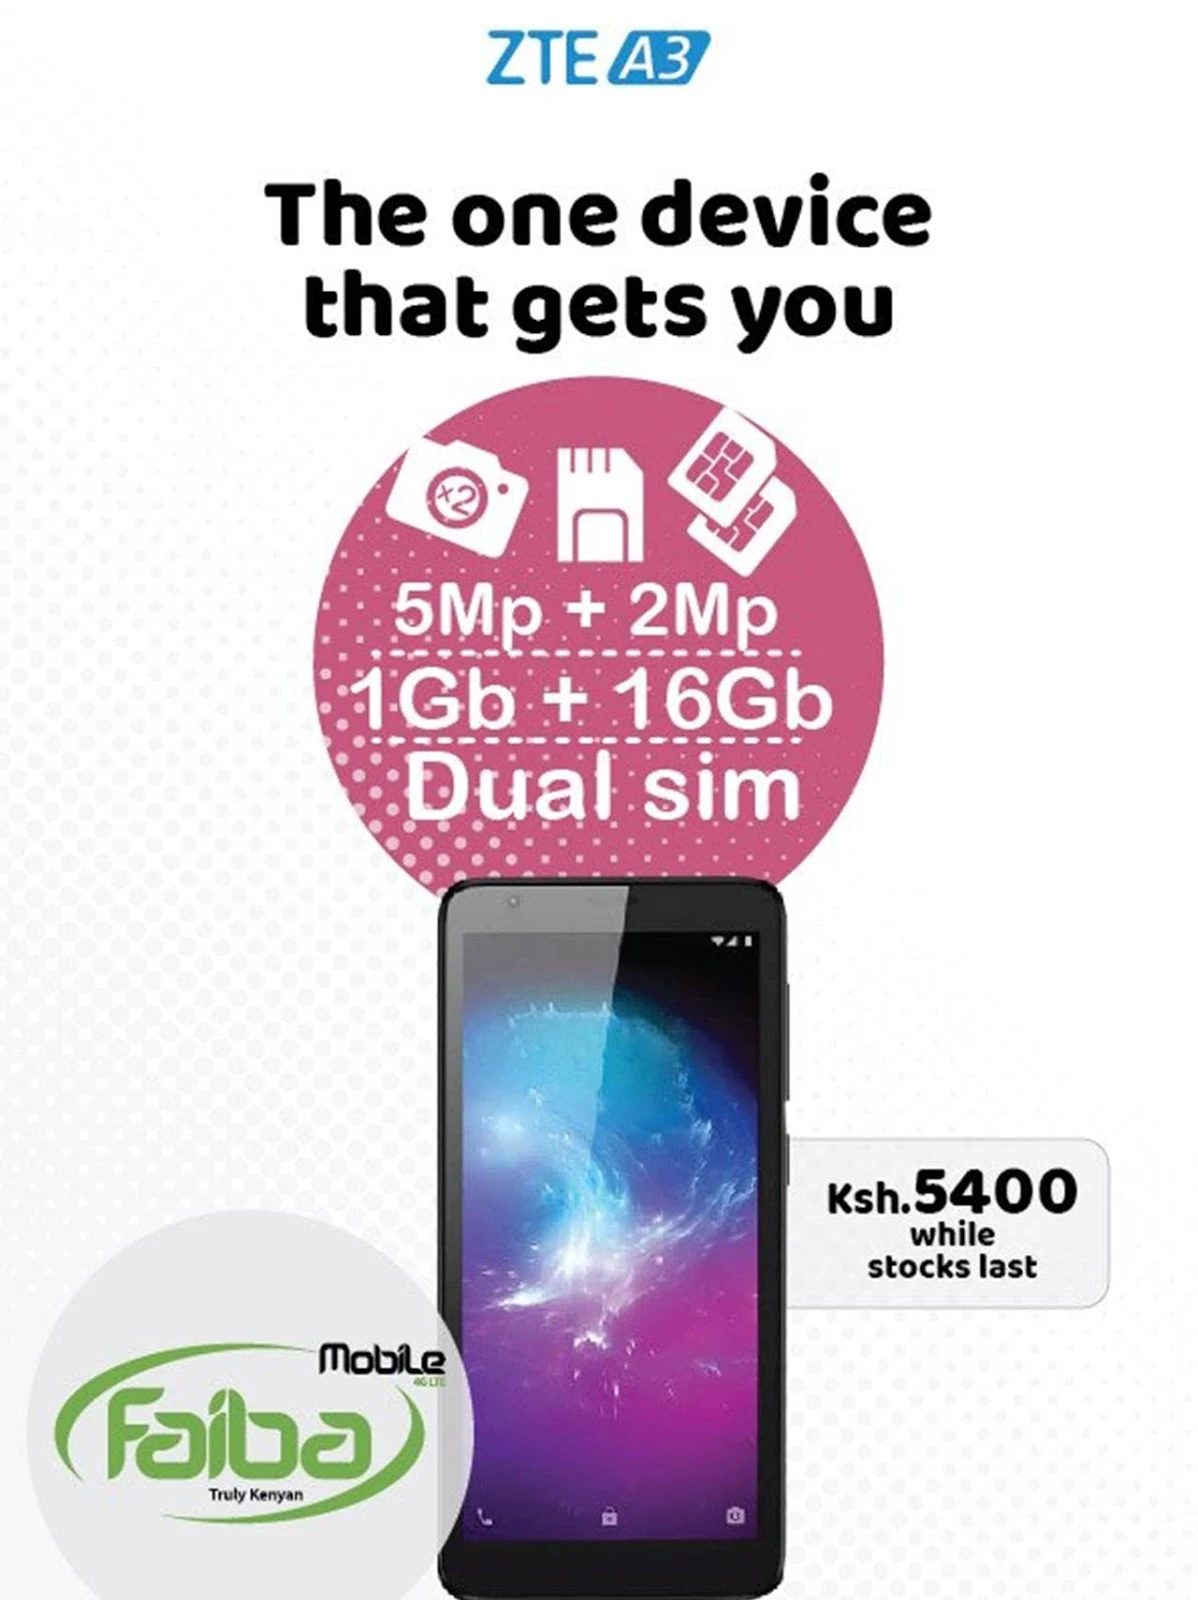 Faiba's ZTE Blade A3 is Yours For Only Kes 5400 Plus Free 30GB